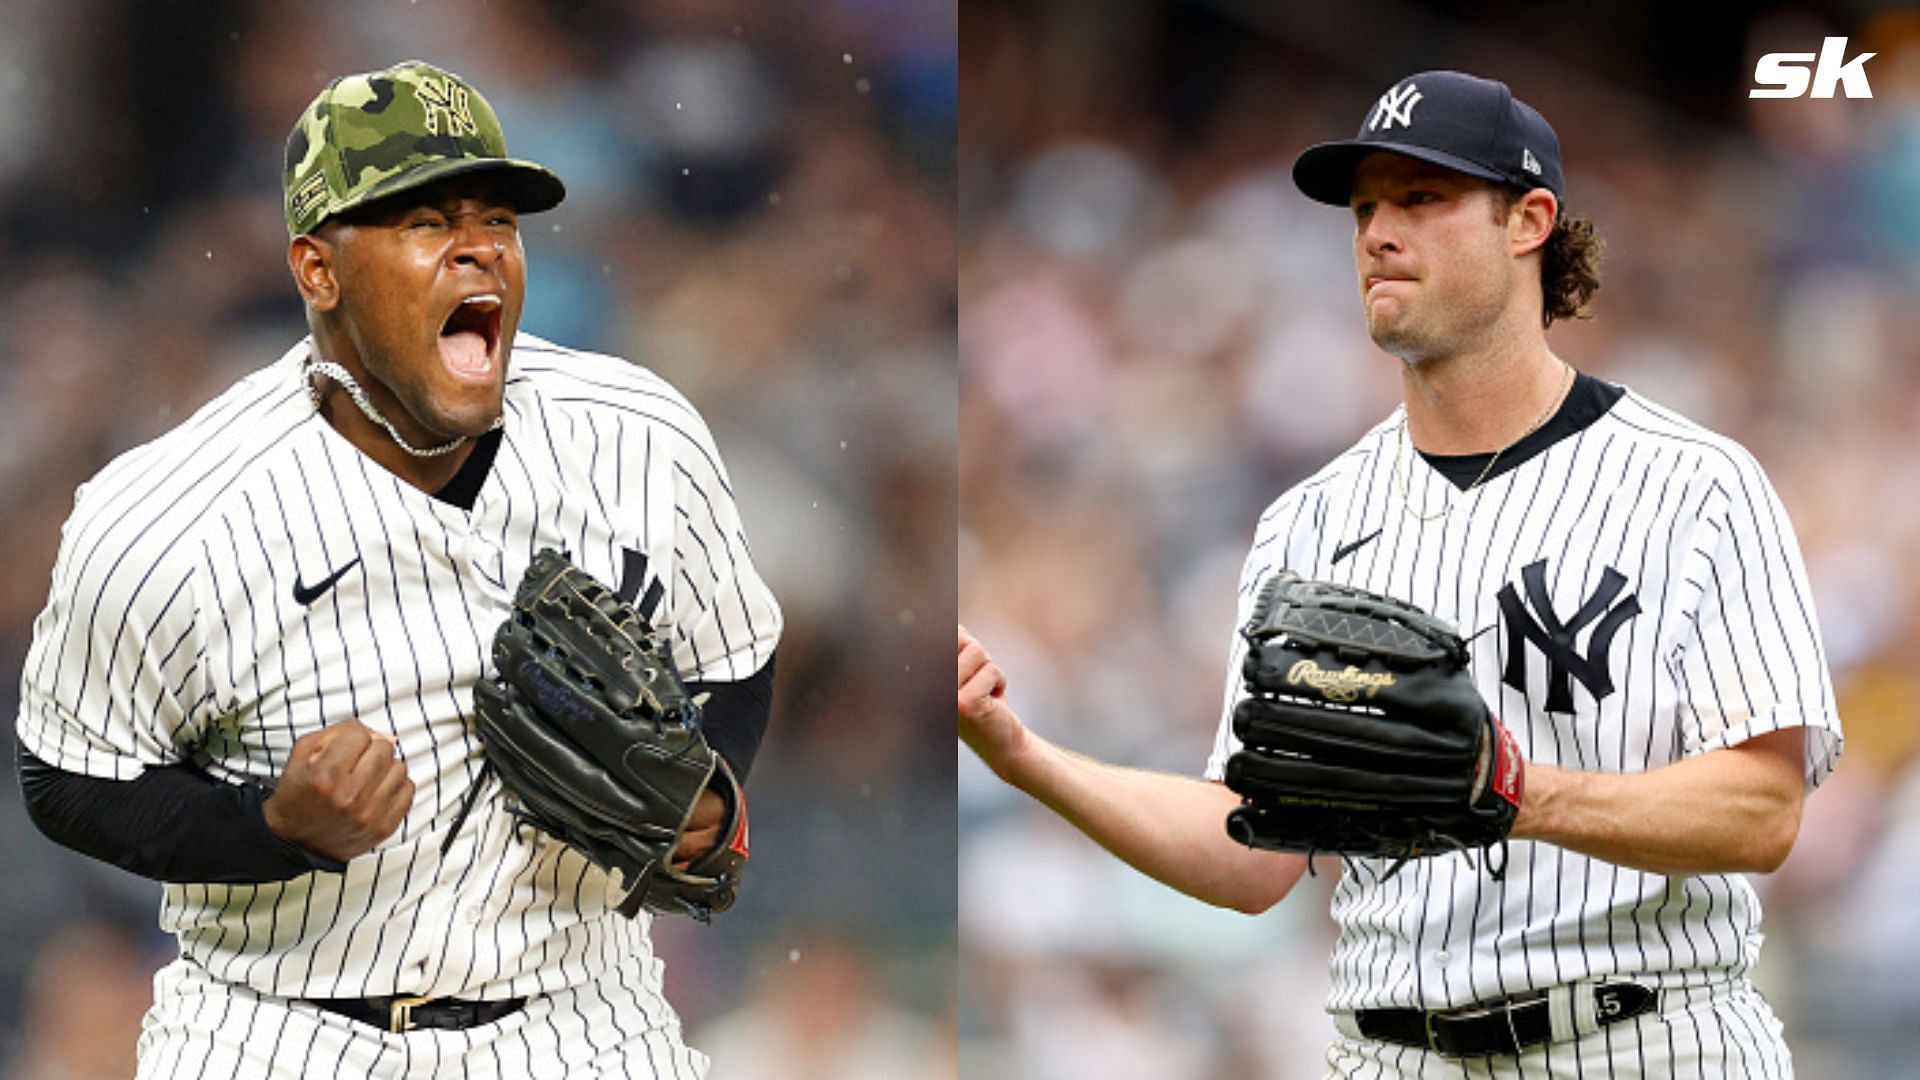 Which Yankees players have 200+ strikeouts in a season? MLB Immaculate Grid Answers September 22